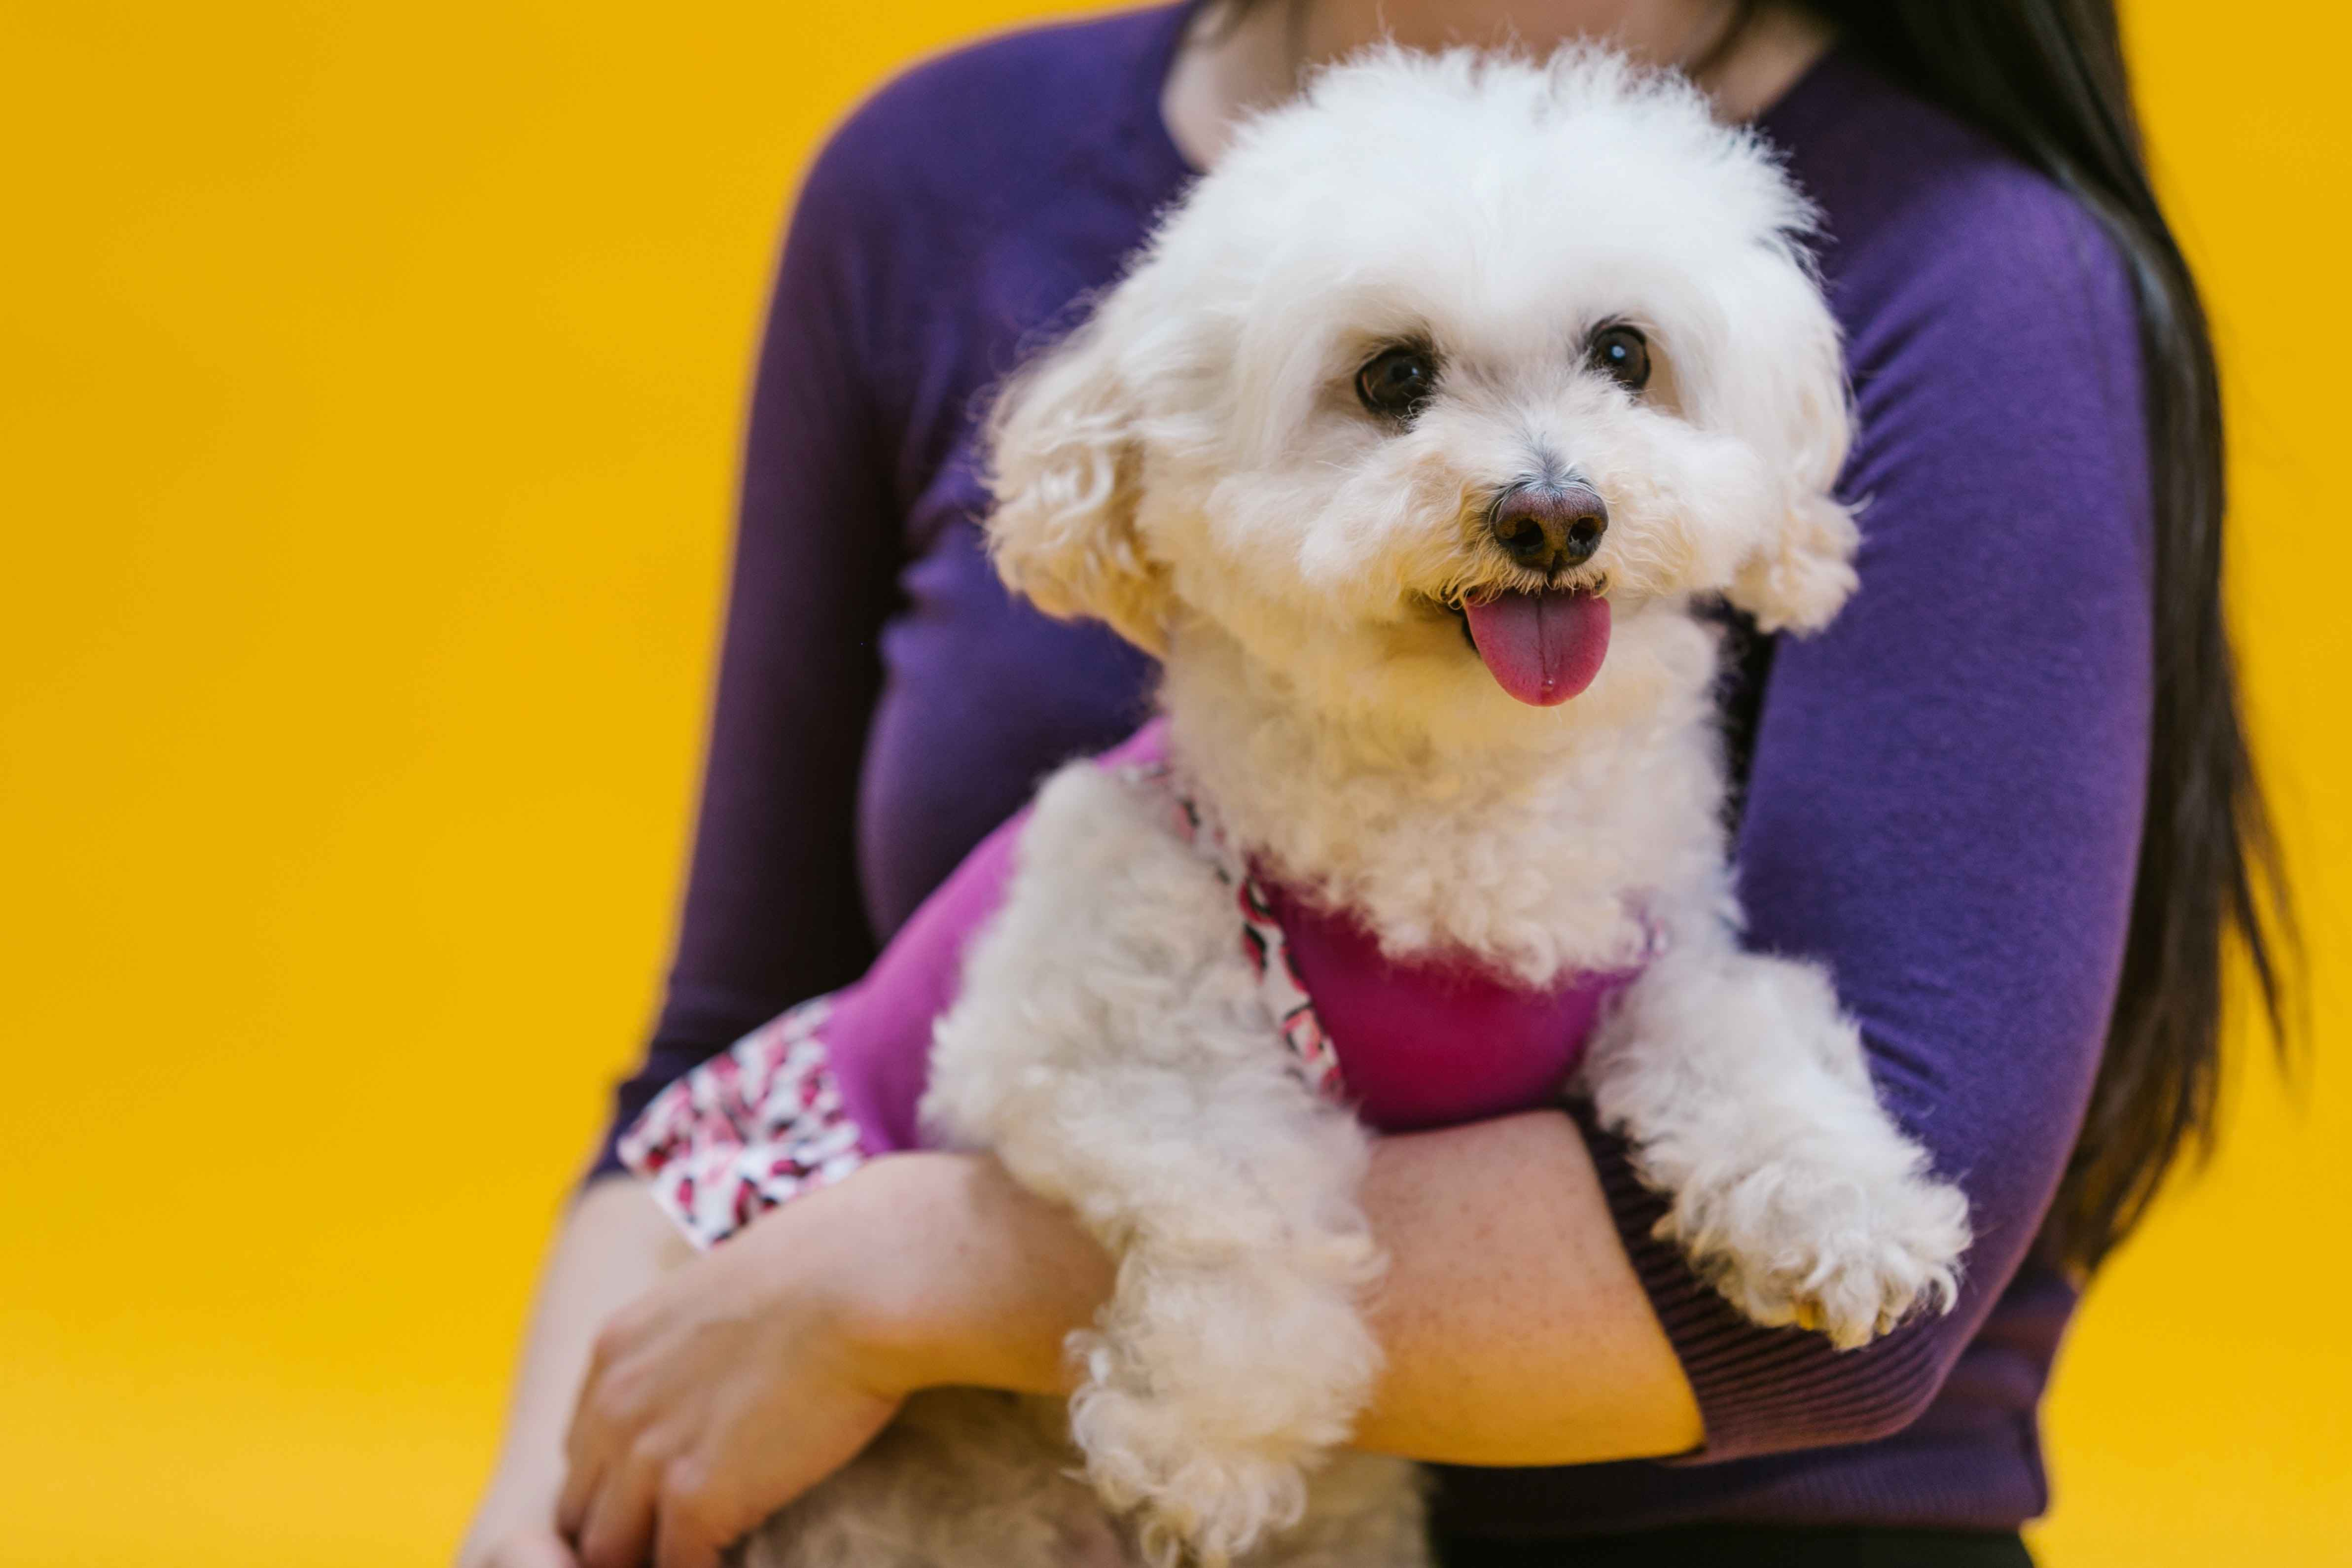 What are the signs and symptoms of urinary incontinence in Poodles, and how can it be managed?